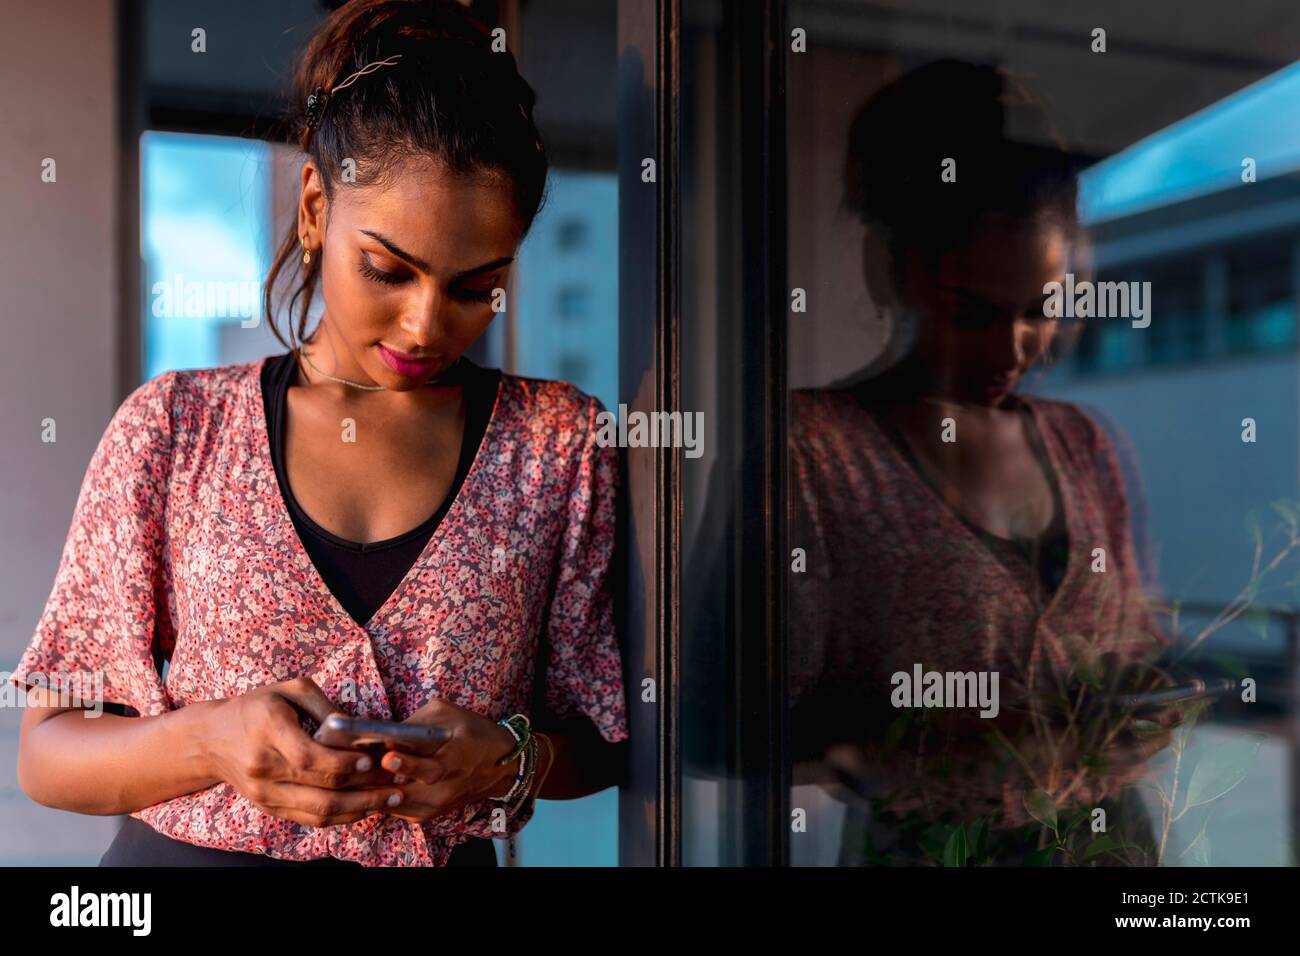 Beautiful woman using phone while leaning by reflection on window in balcony Stock Photo